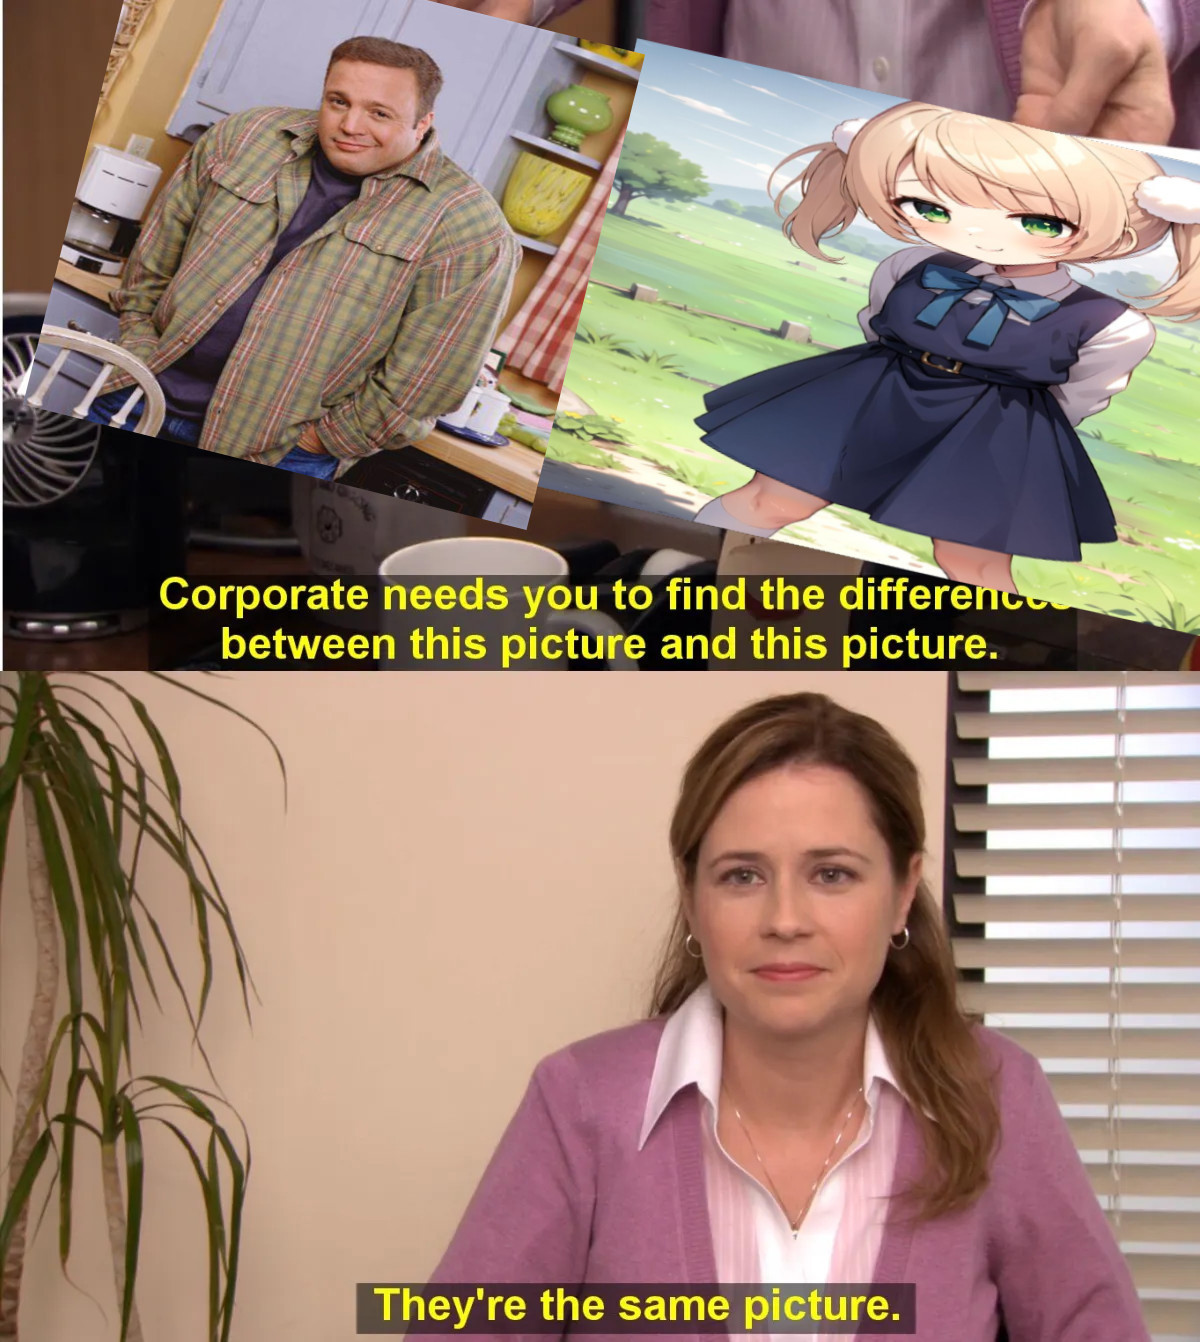 the-office-blank-meme-template-pam-two-pictures-corporate-needs-you-to-find-the-difference-between-these-pictures-theyre-the-same.jpg